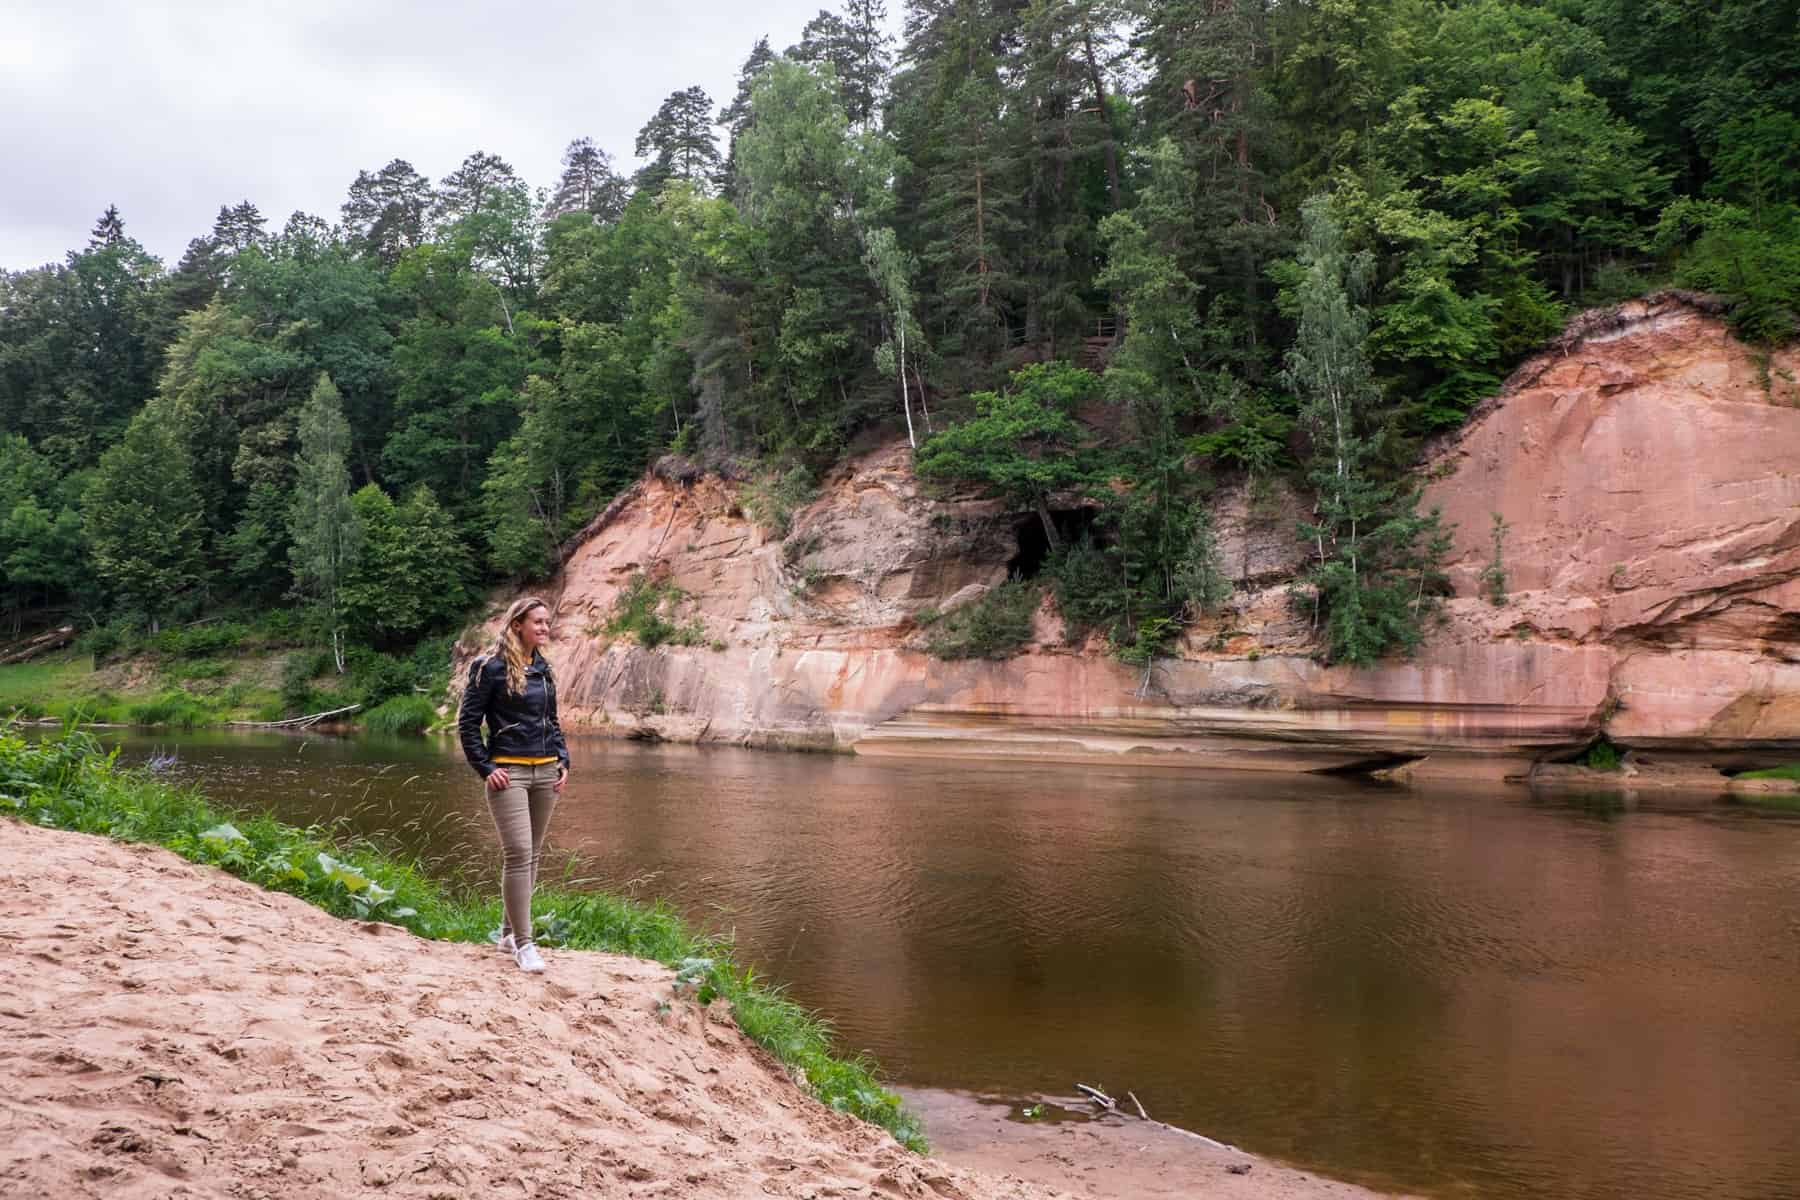 A woman in khaki pants and a black jacket stands on a sandy riverbank looking towards an ochre red cave under a green forest